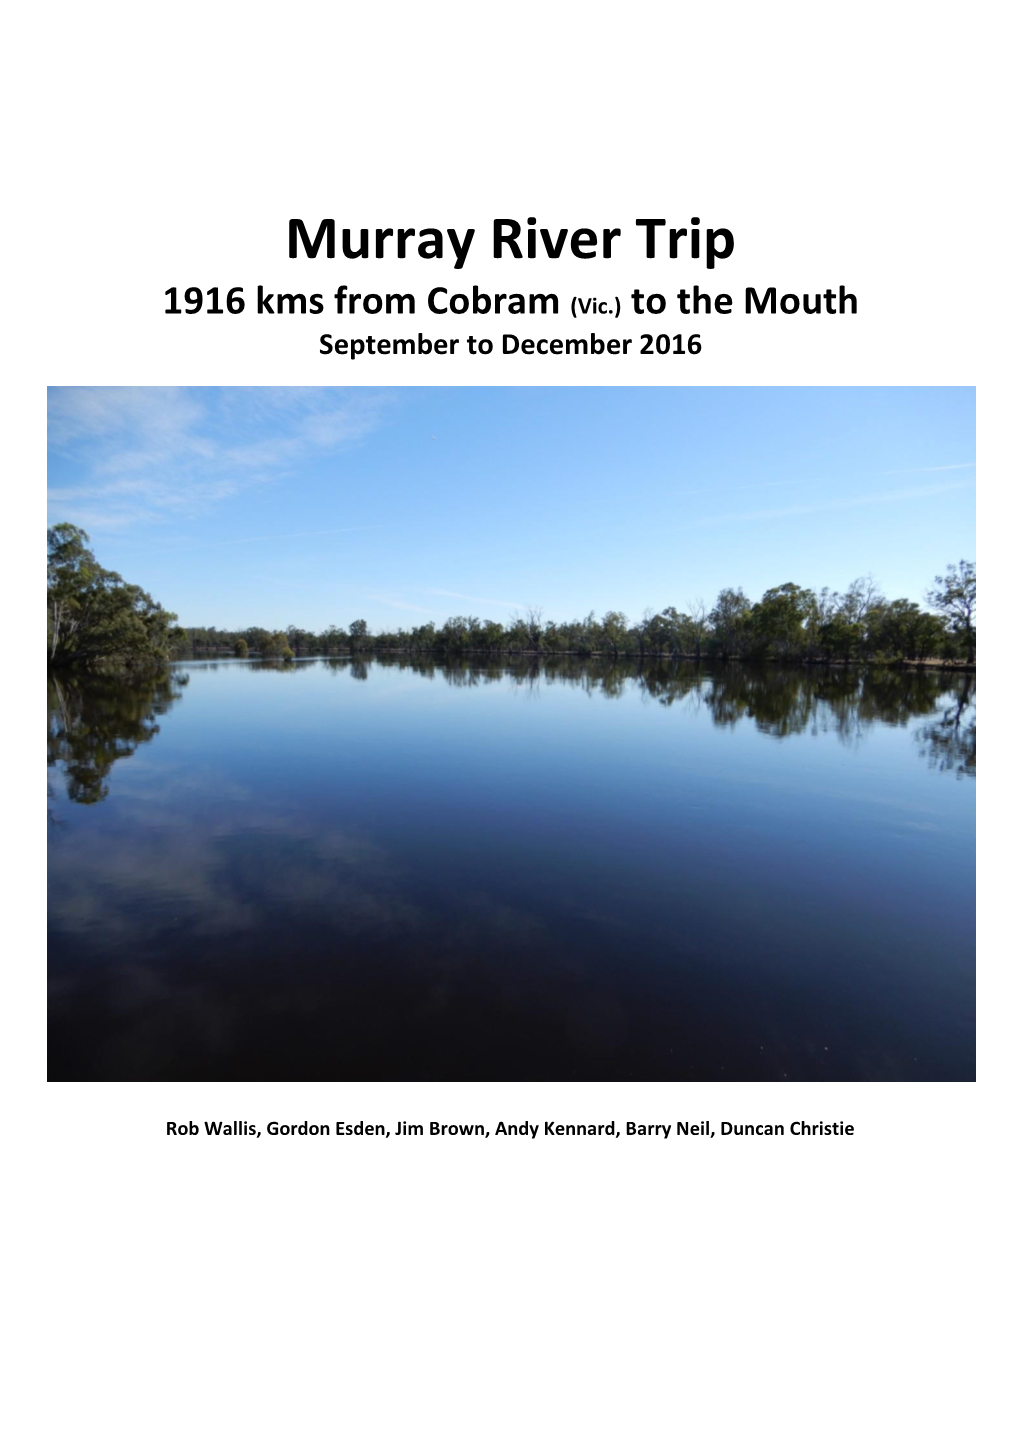 Murray River Trip 1916 Kms from Cobram (Vic.) to the Mouth September to December 2016